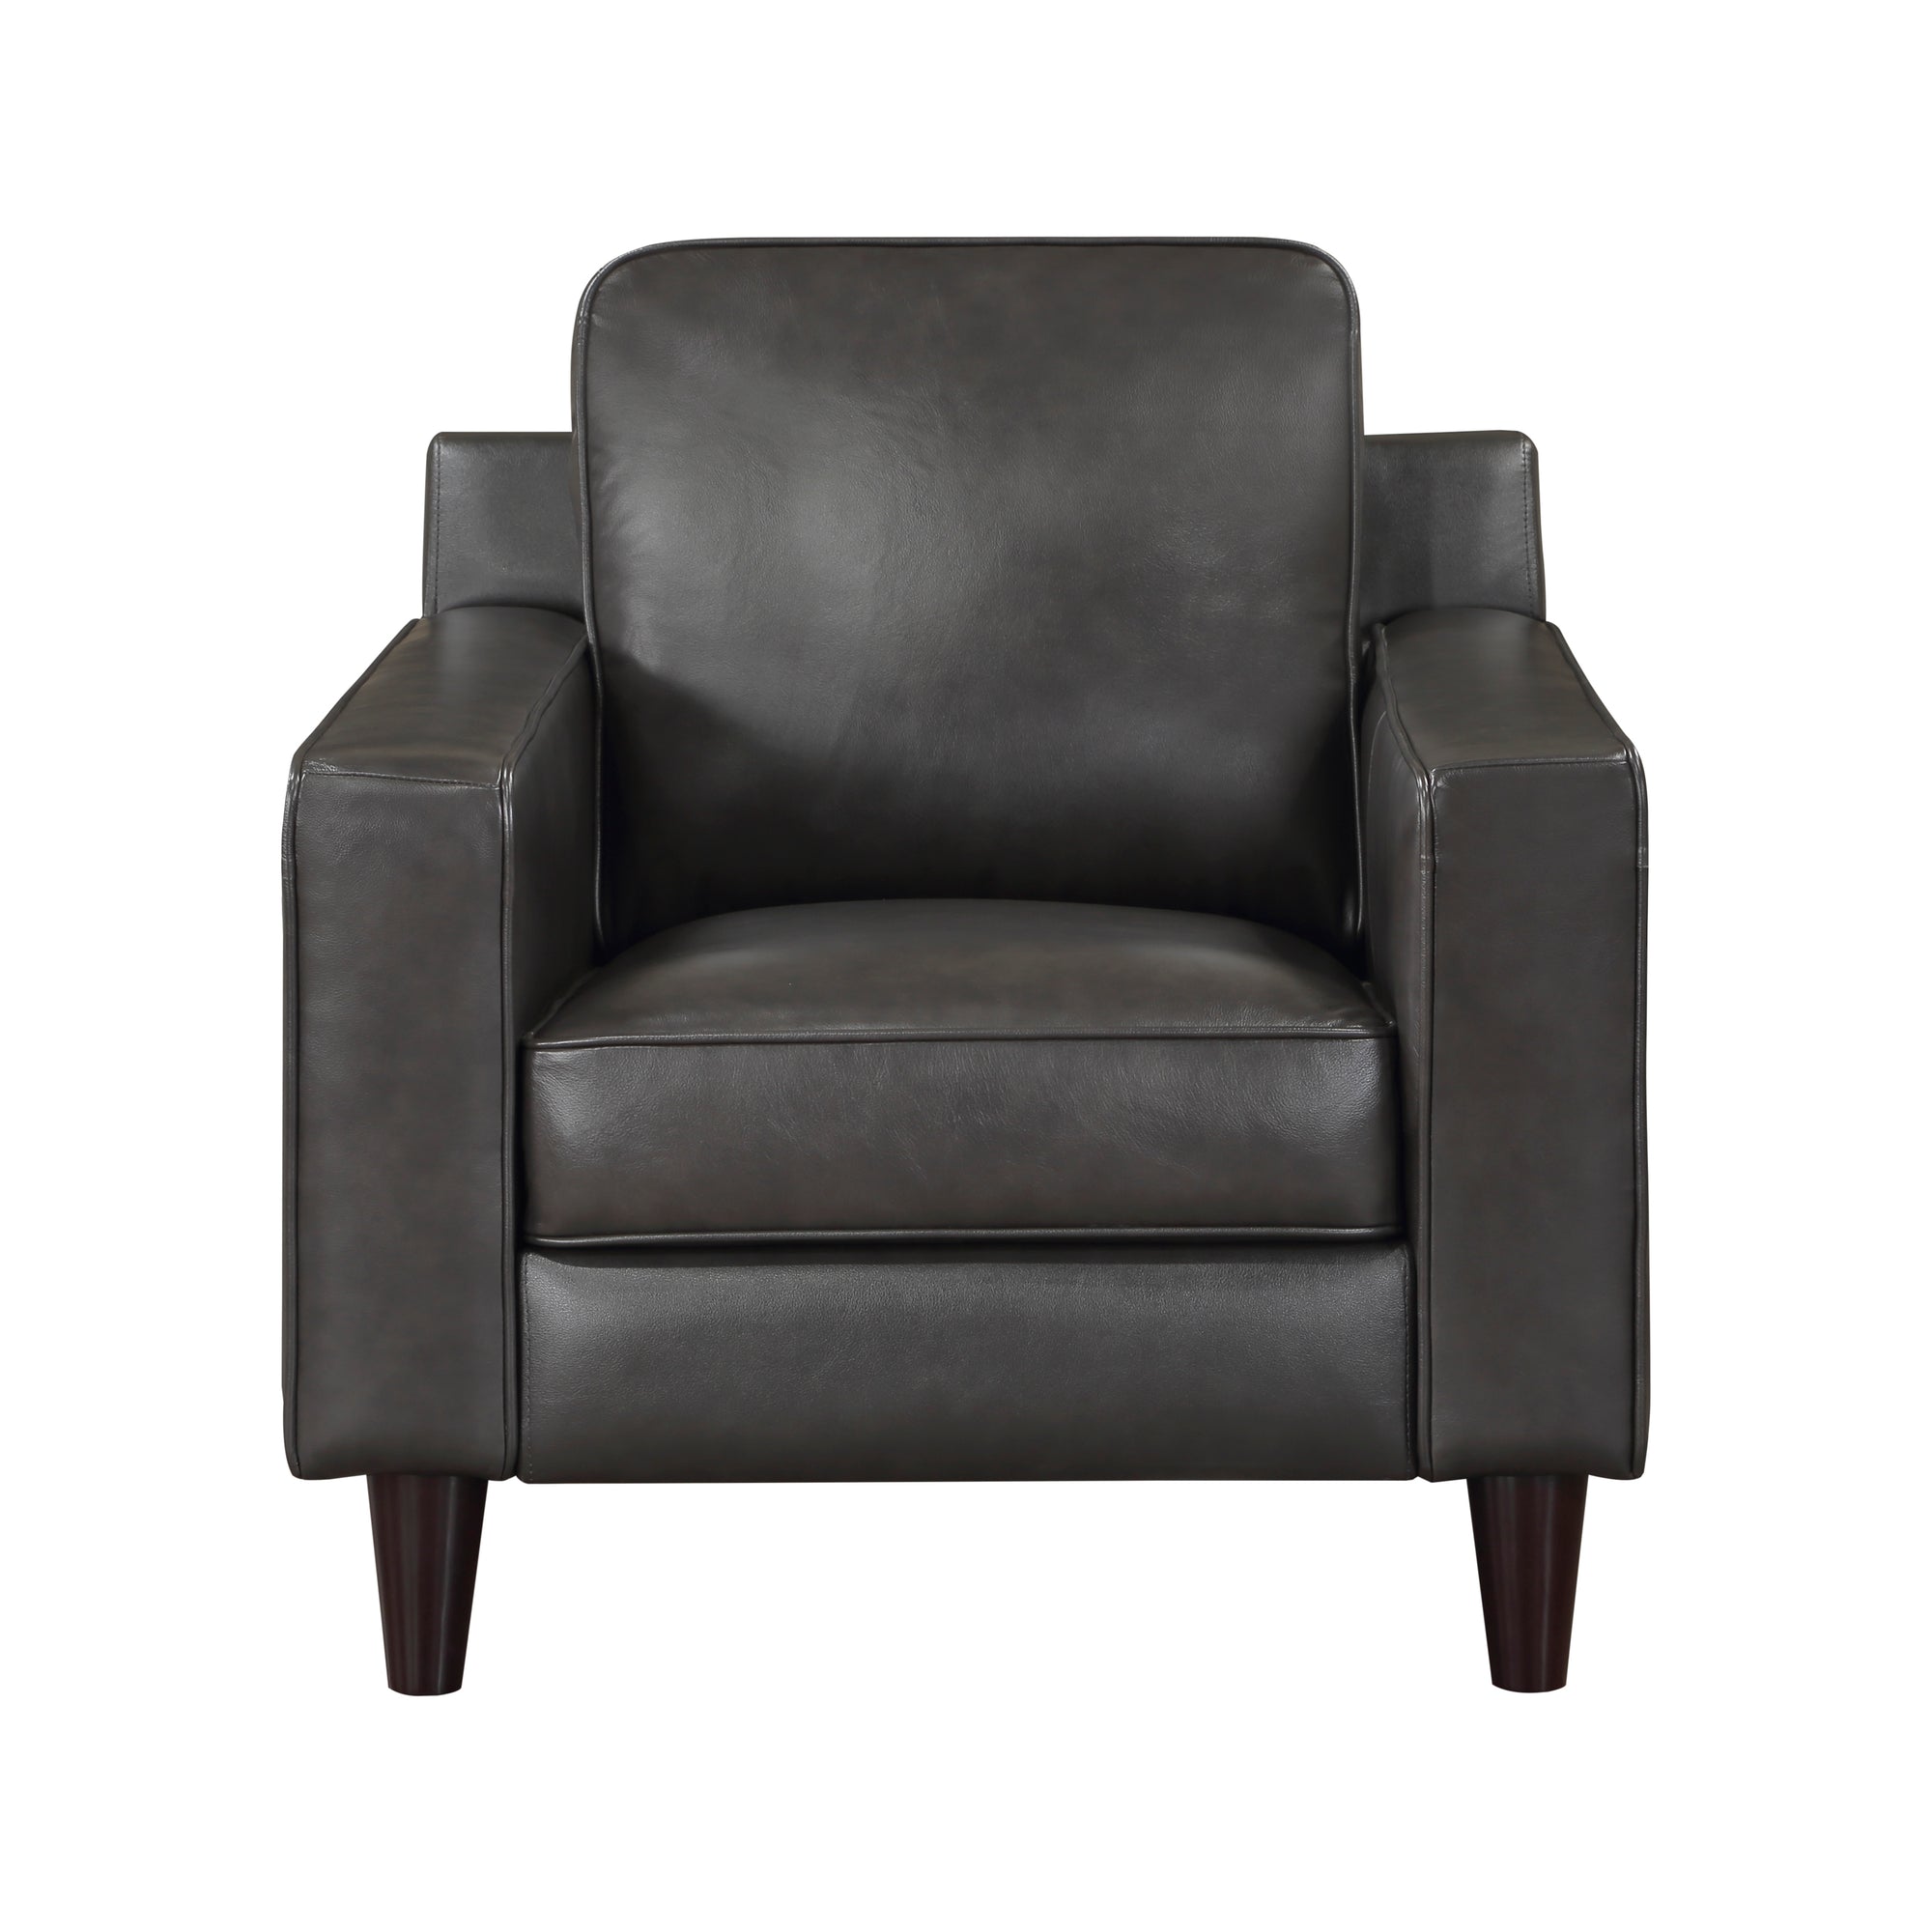 Belen Leather Match Living Room Chair